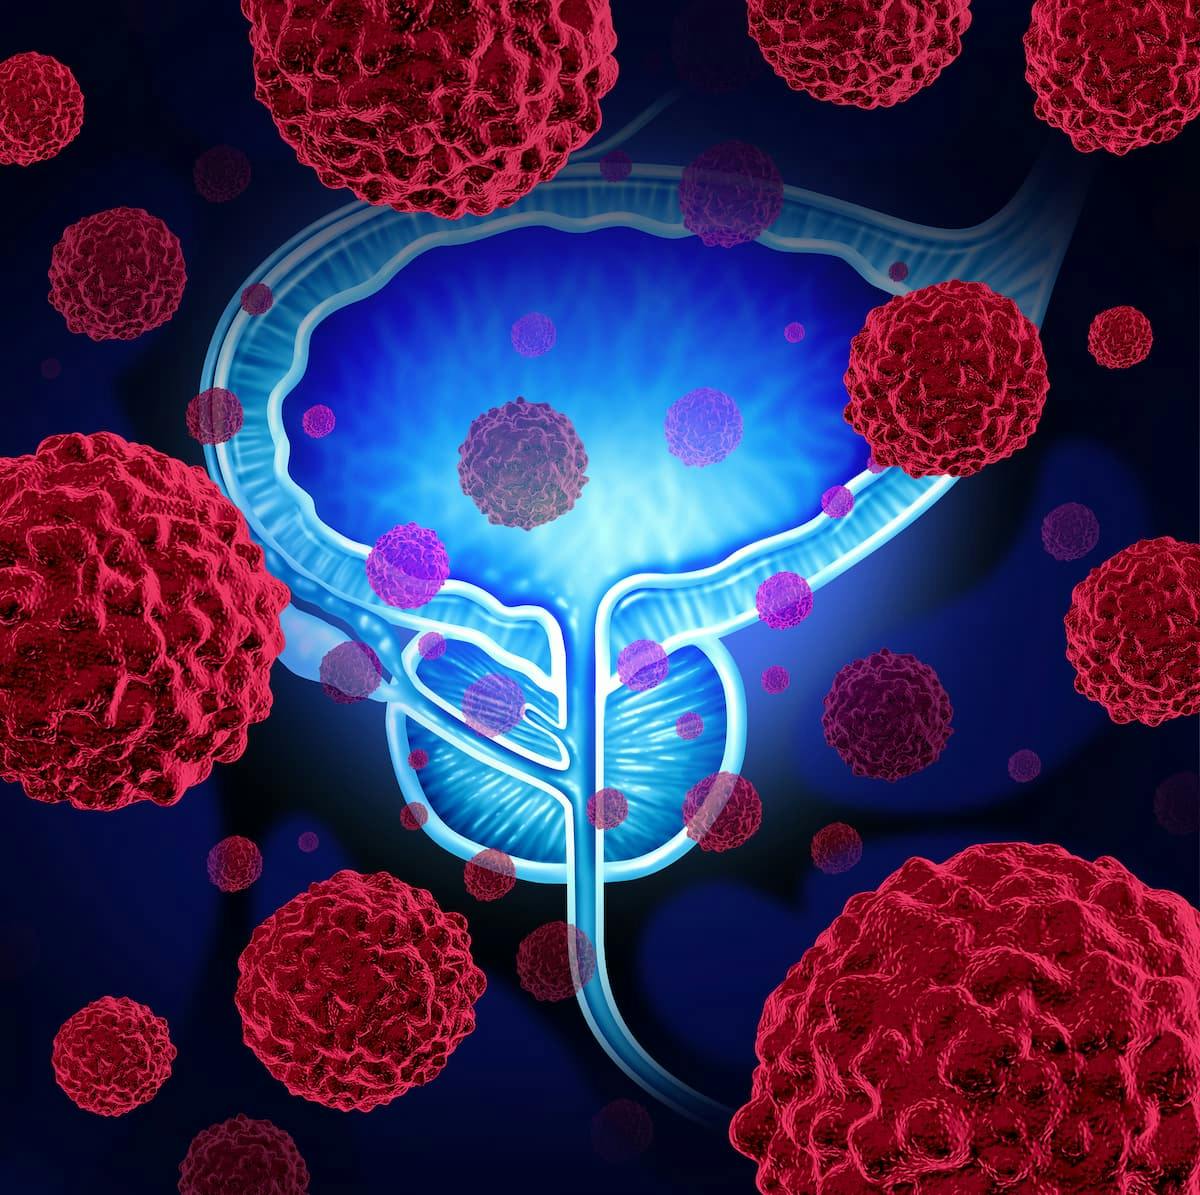 Treatment with 177Lu-PSMA-617 results in similar survival benefit regardless of when it was administered after radium-223 in patients with metastatic castration-resistant prostate cancer, according to an expert from University Hospital of Münster in Germany.